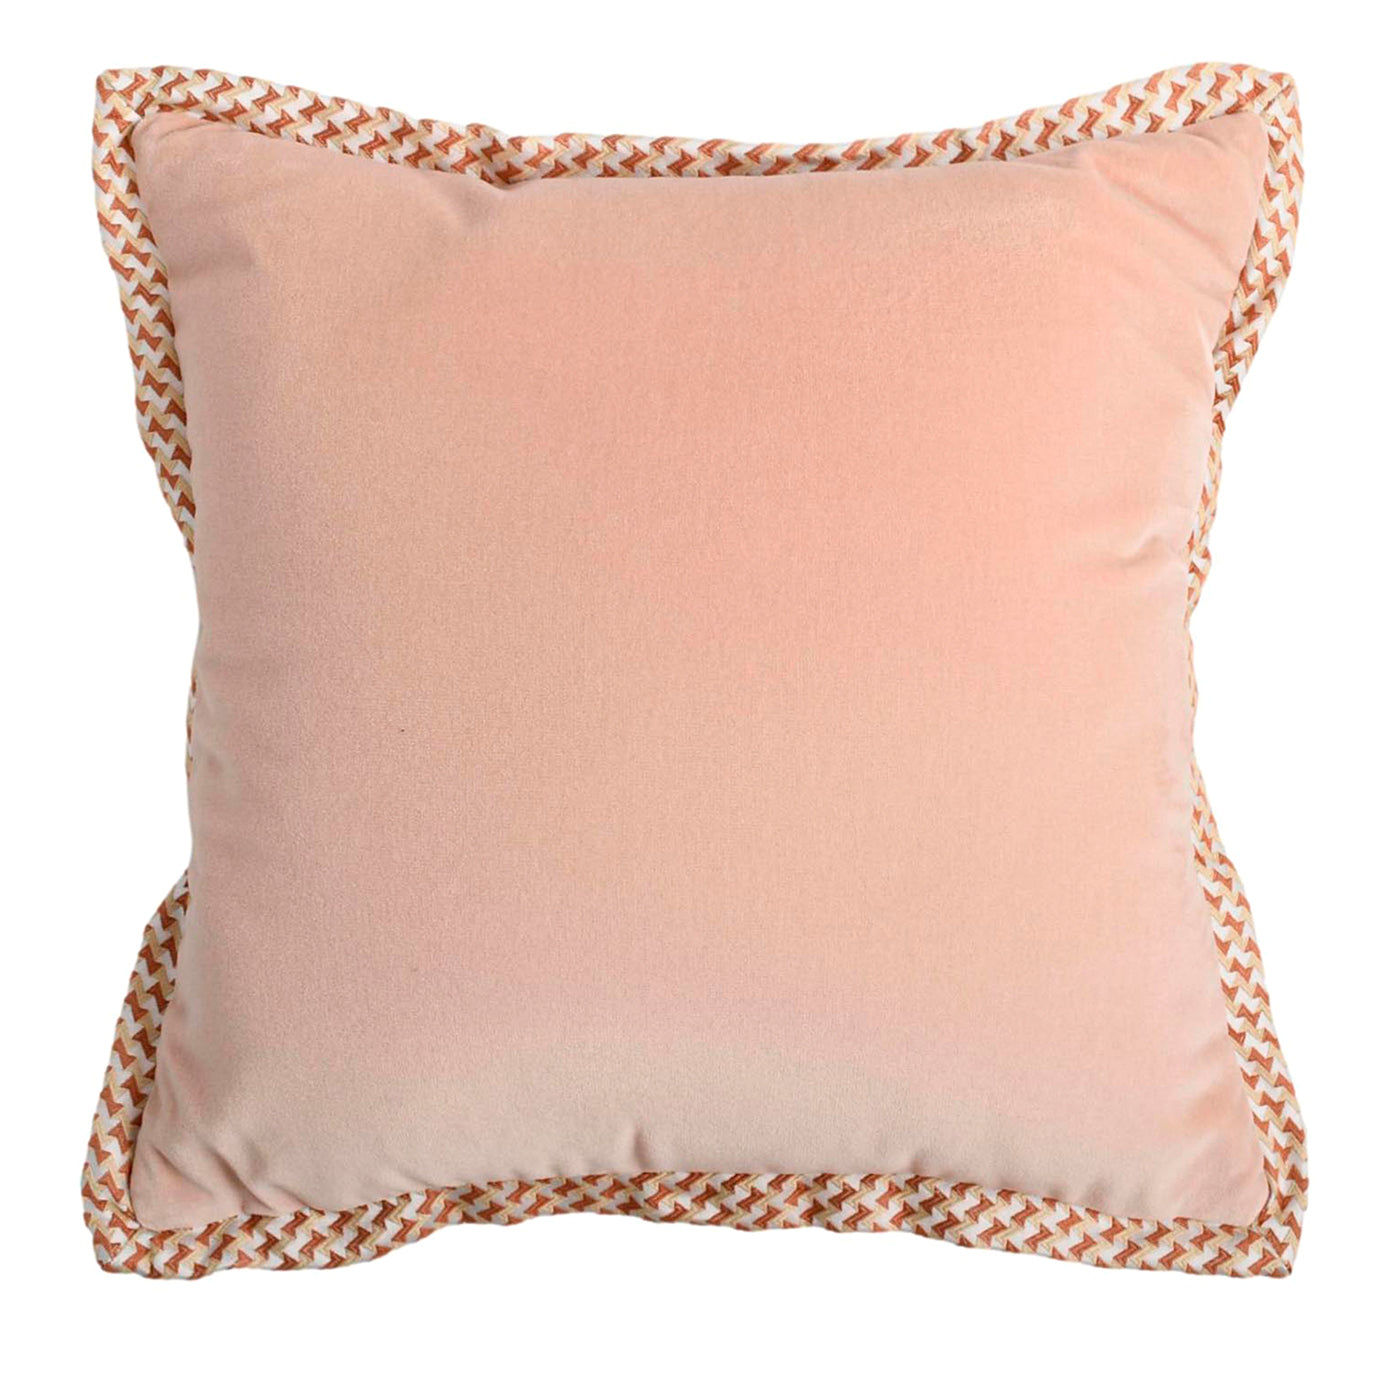 Pink Carrè Flat Cushion in cotton velvet and Micro-Patterned jacquard fabric - Main view